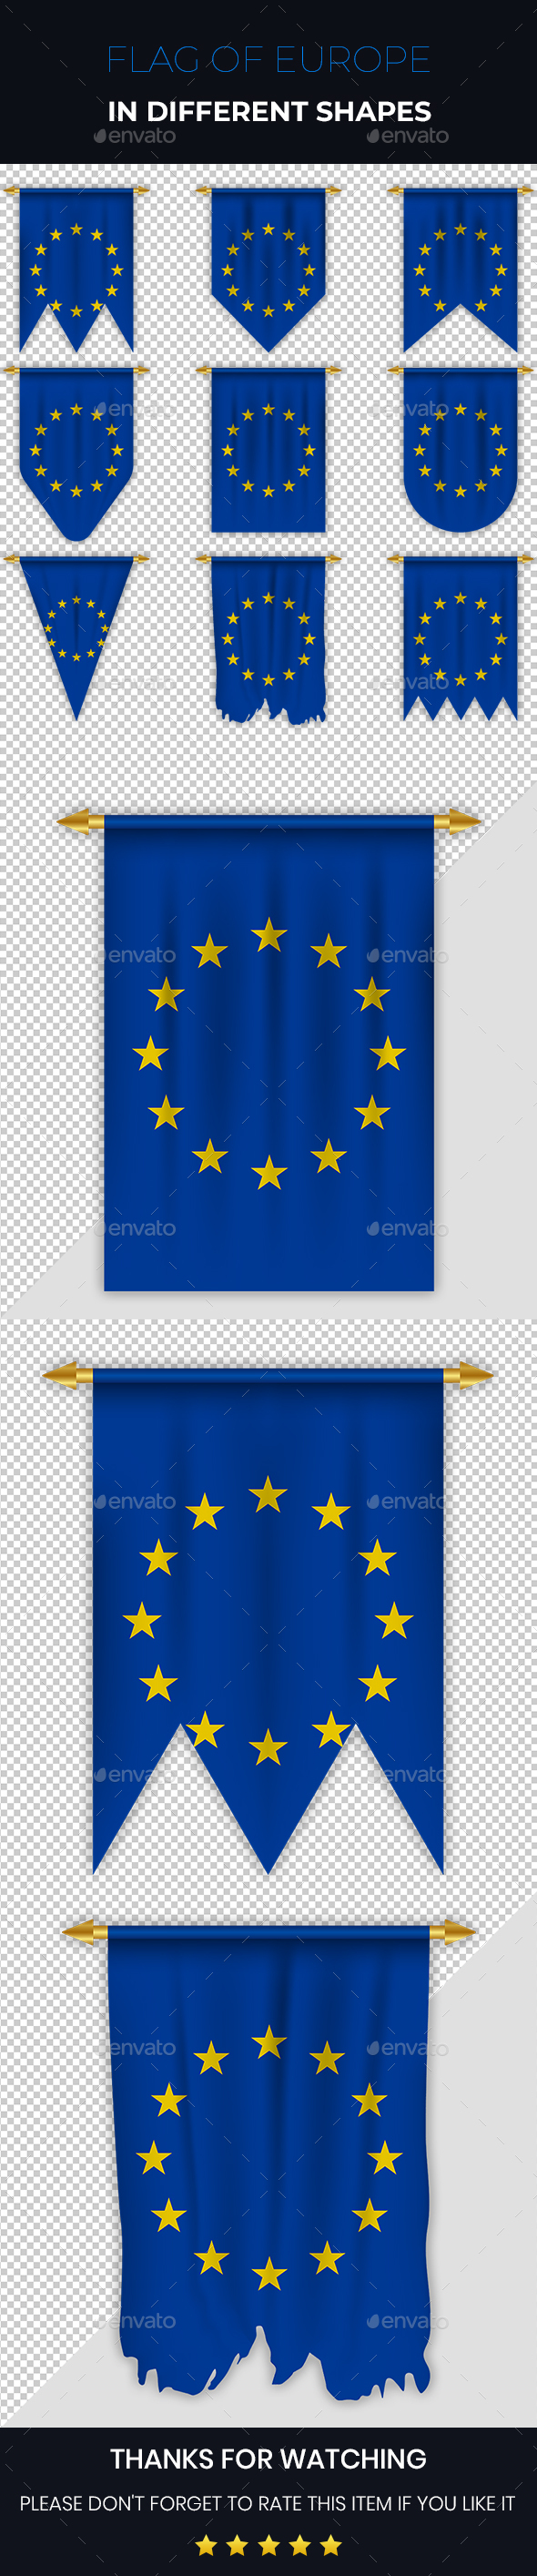 Europe Flag In Different Shapes